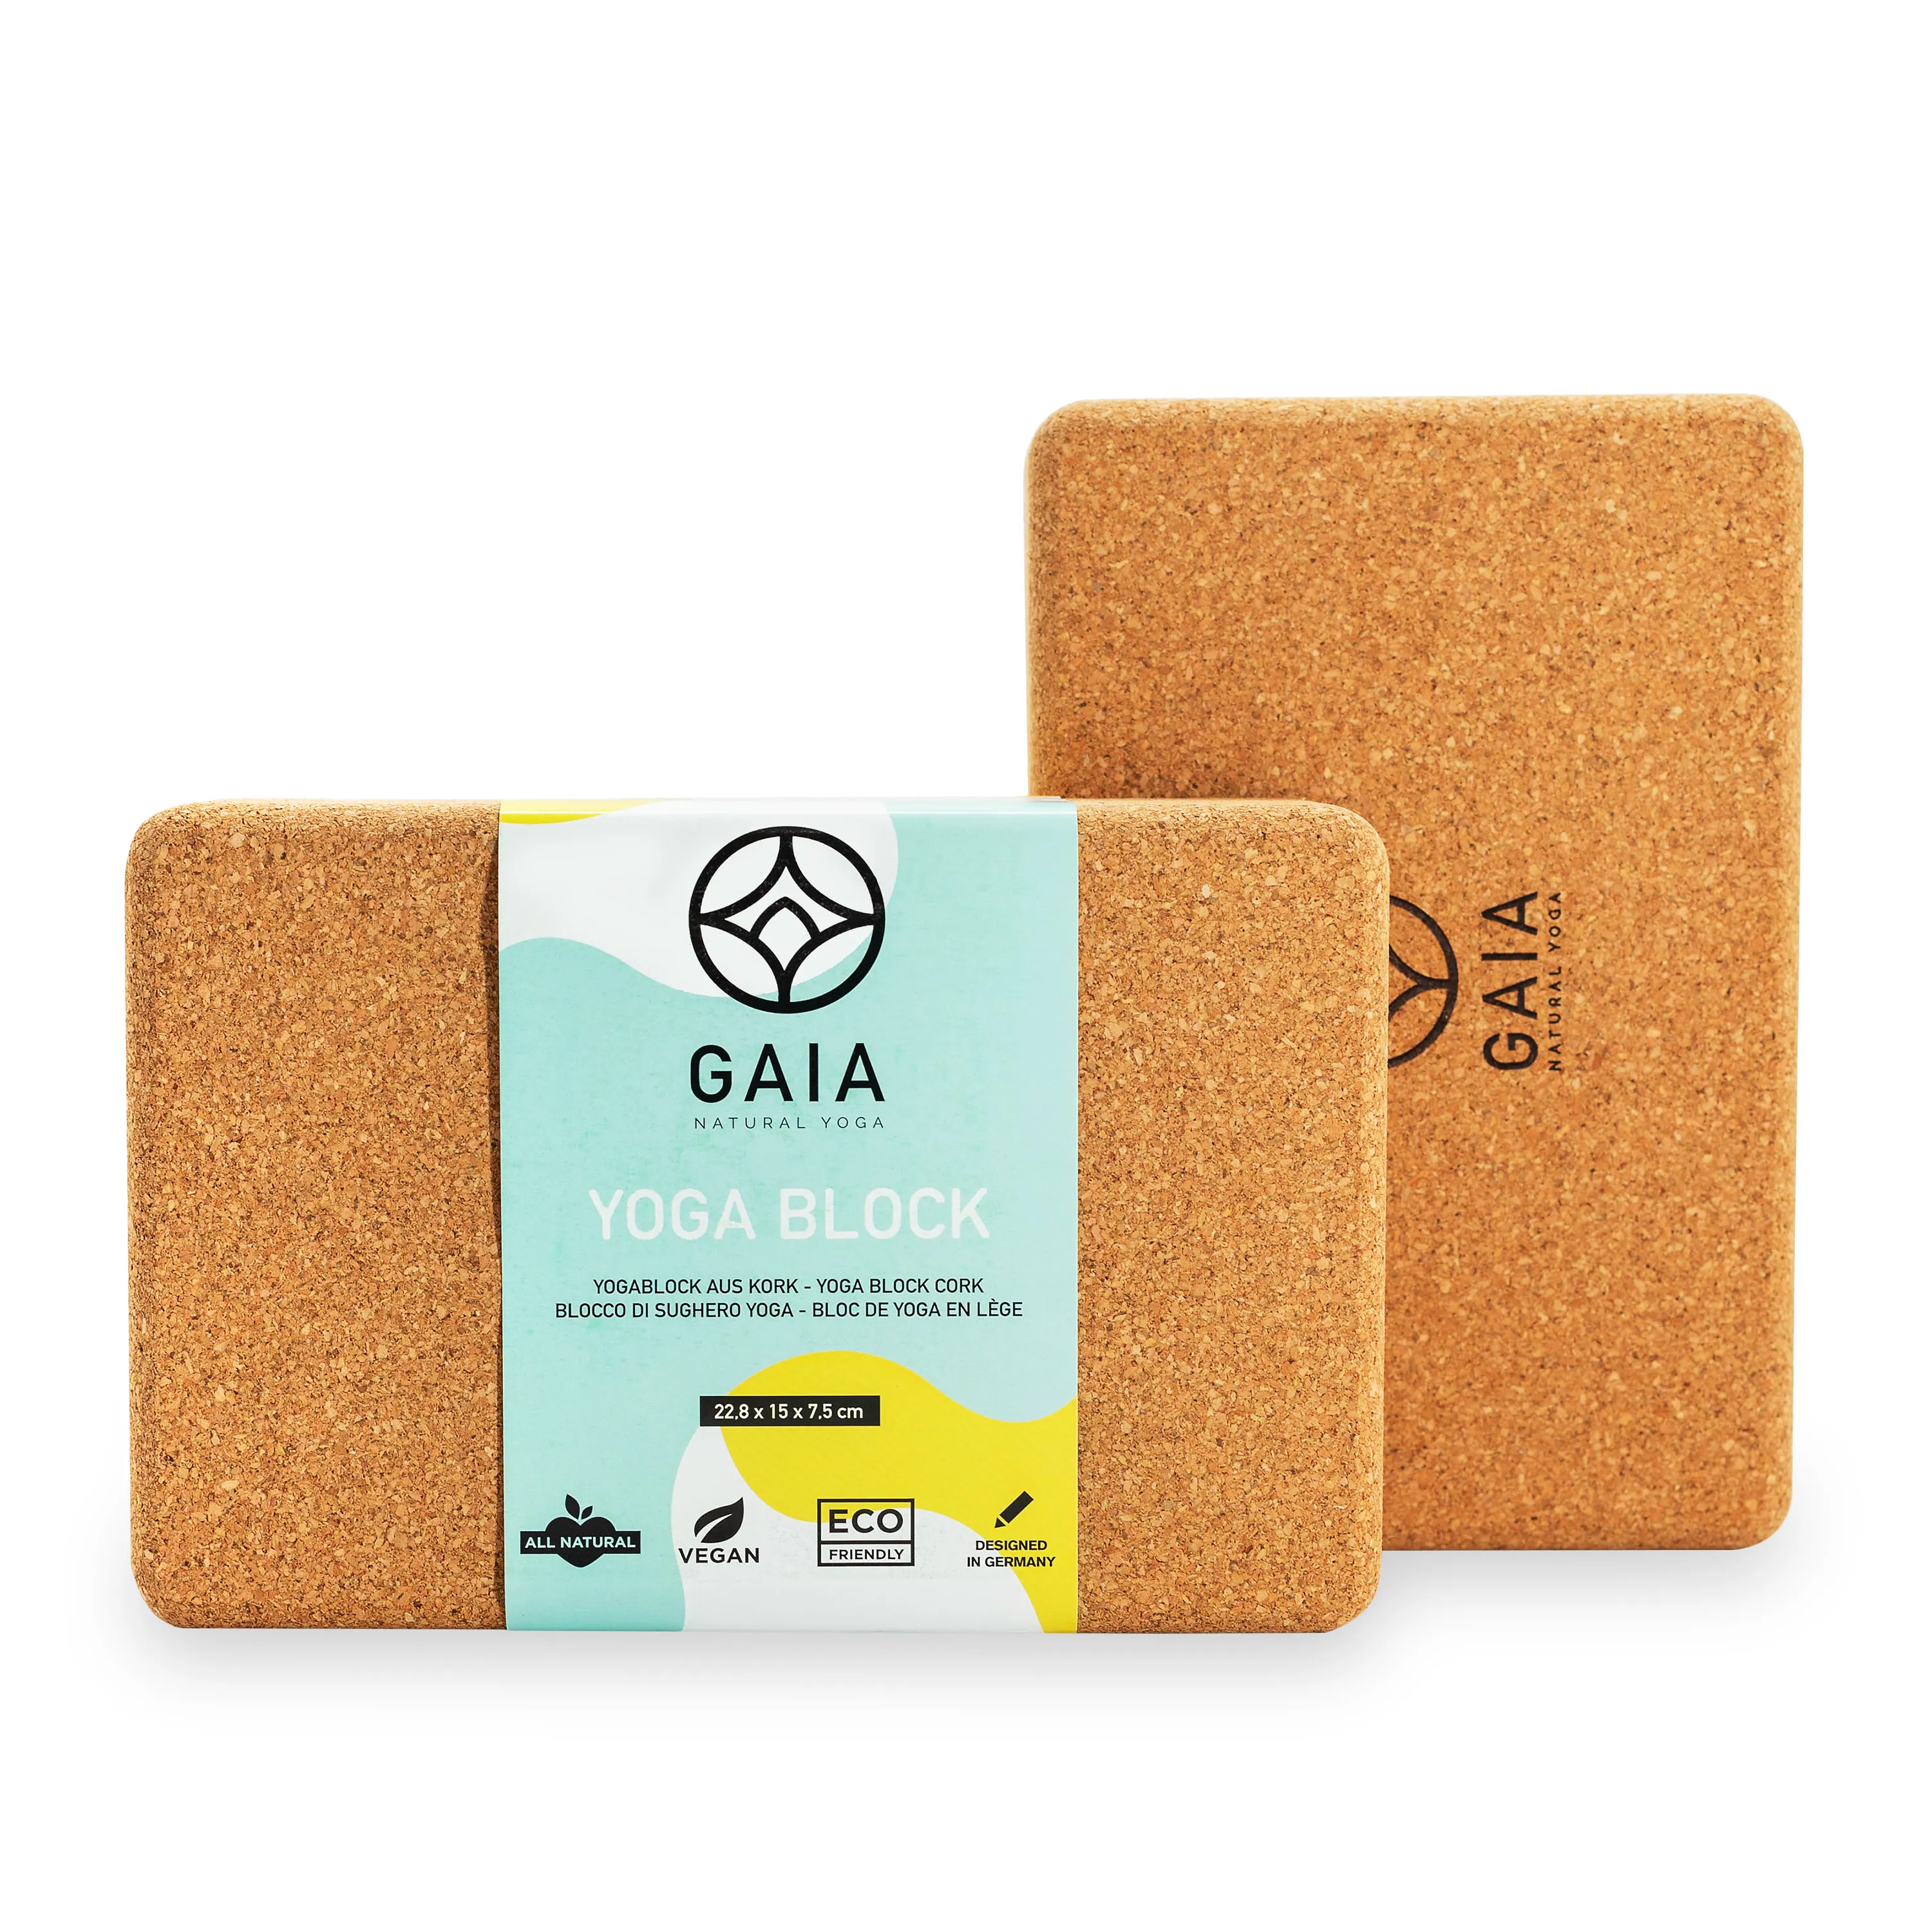  Gaiam Cork Yoga Block – 4x6x9 Inch, Natural Cork Block for Yoga,  Pilates, Stretching, Balance, Gym, Home Workout, Meditation, Non-Slip,  High-Density, Rounded Edges for Enhanced Poses and Flexibility : Clothing,  Shoes